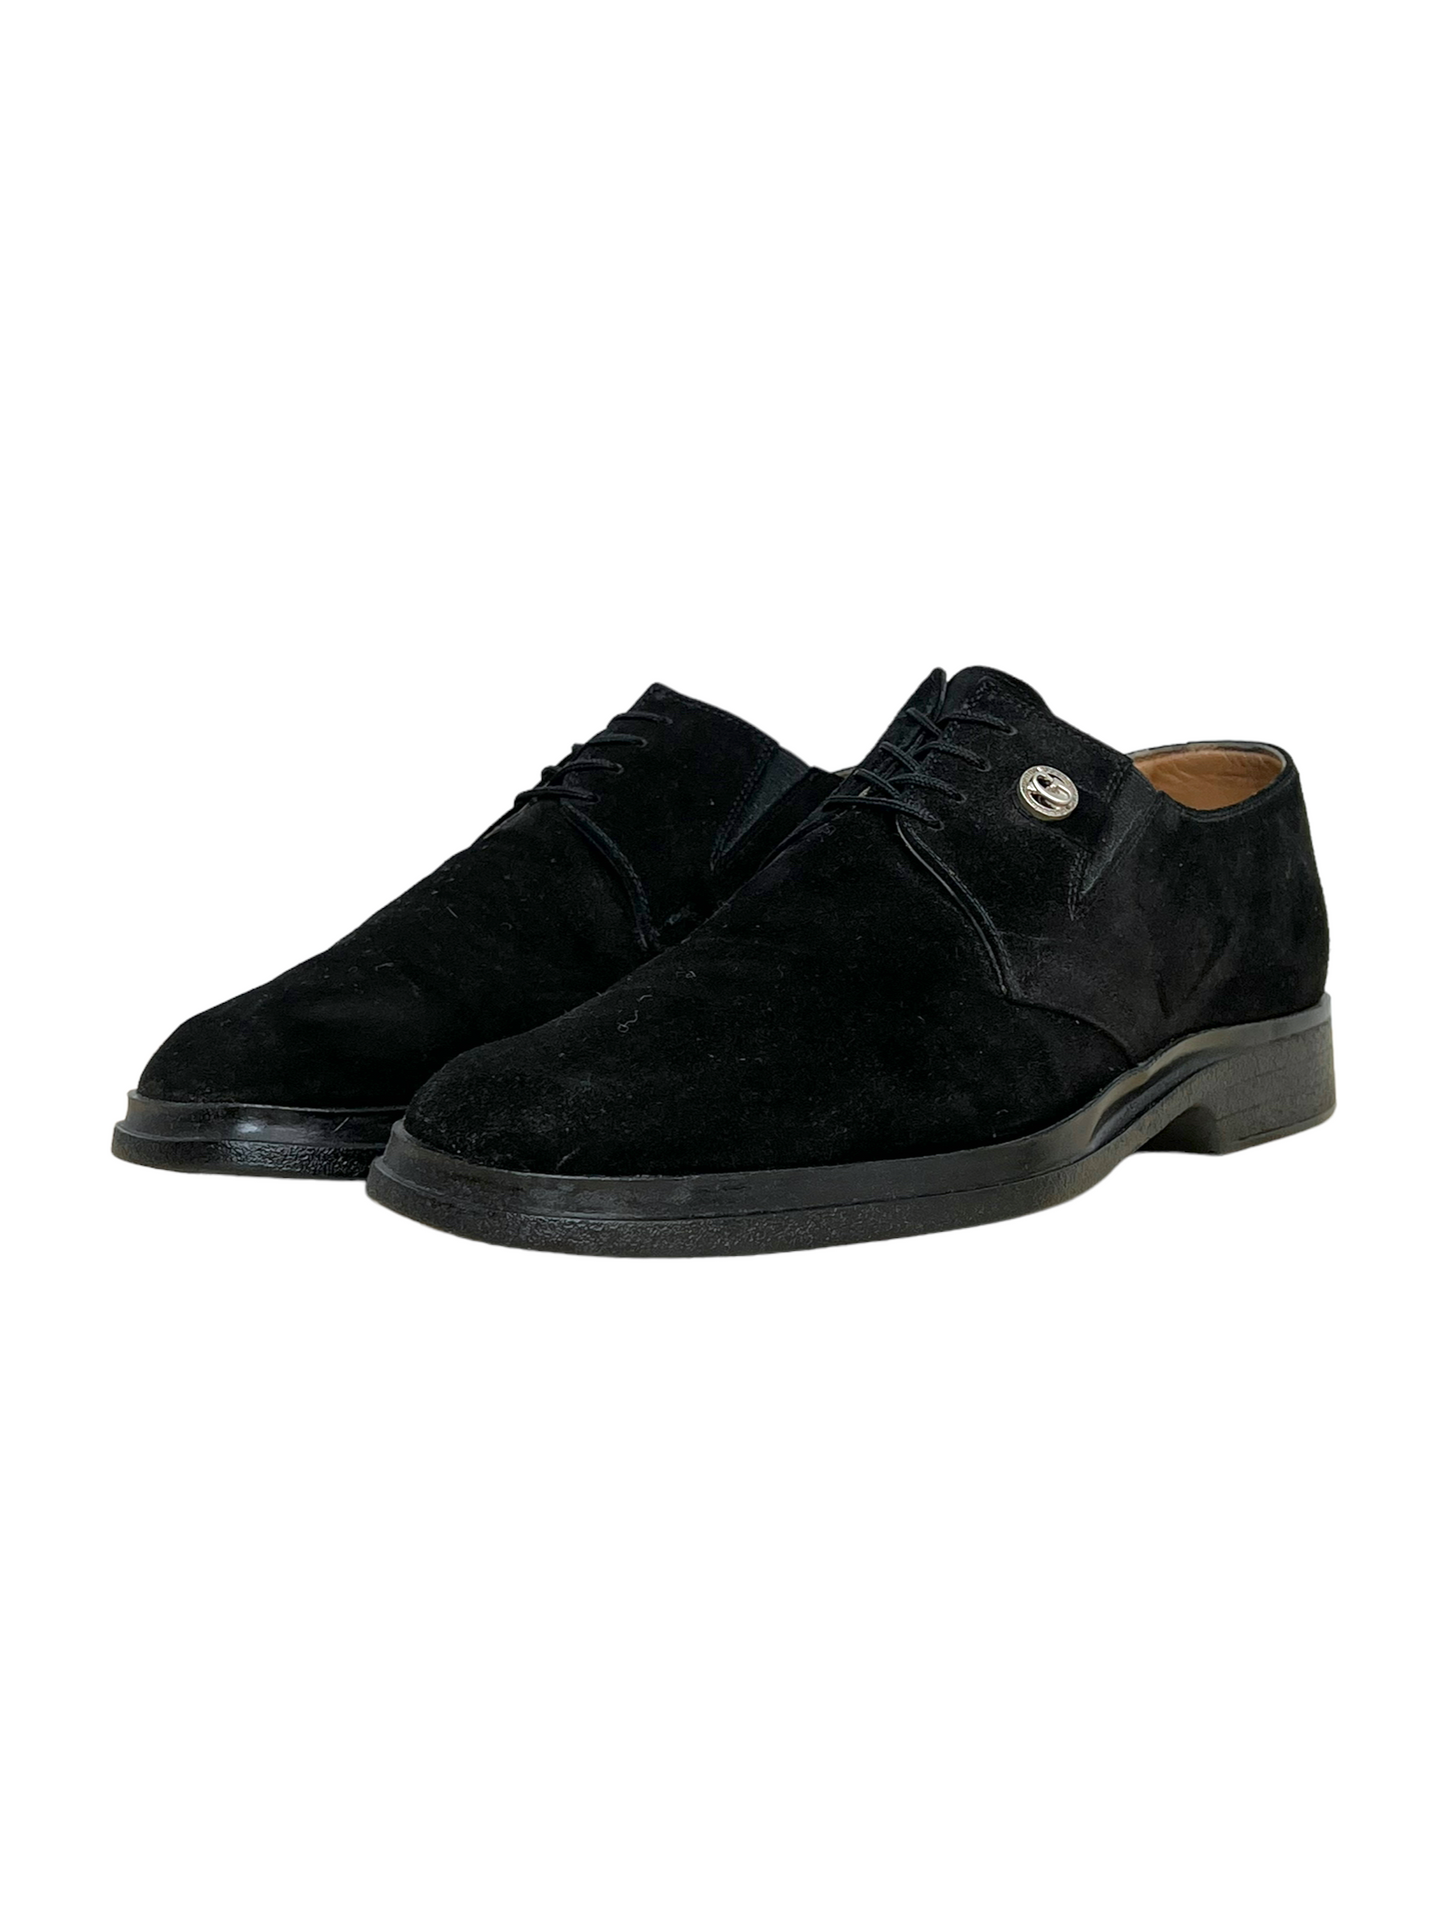 Versace Black Velvet Oxford Dress Shoes  - Genuine Design Luxury Consignment for Men. New & Pre-Owned Clothing, Shoes, & Accessories. Calgary, Canada